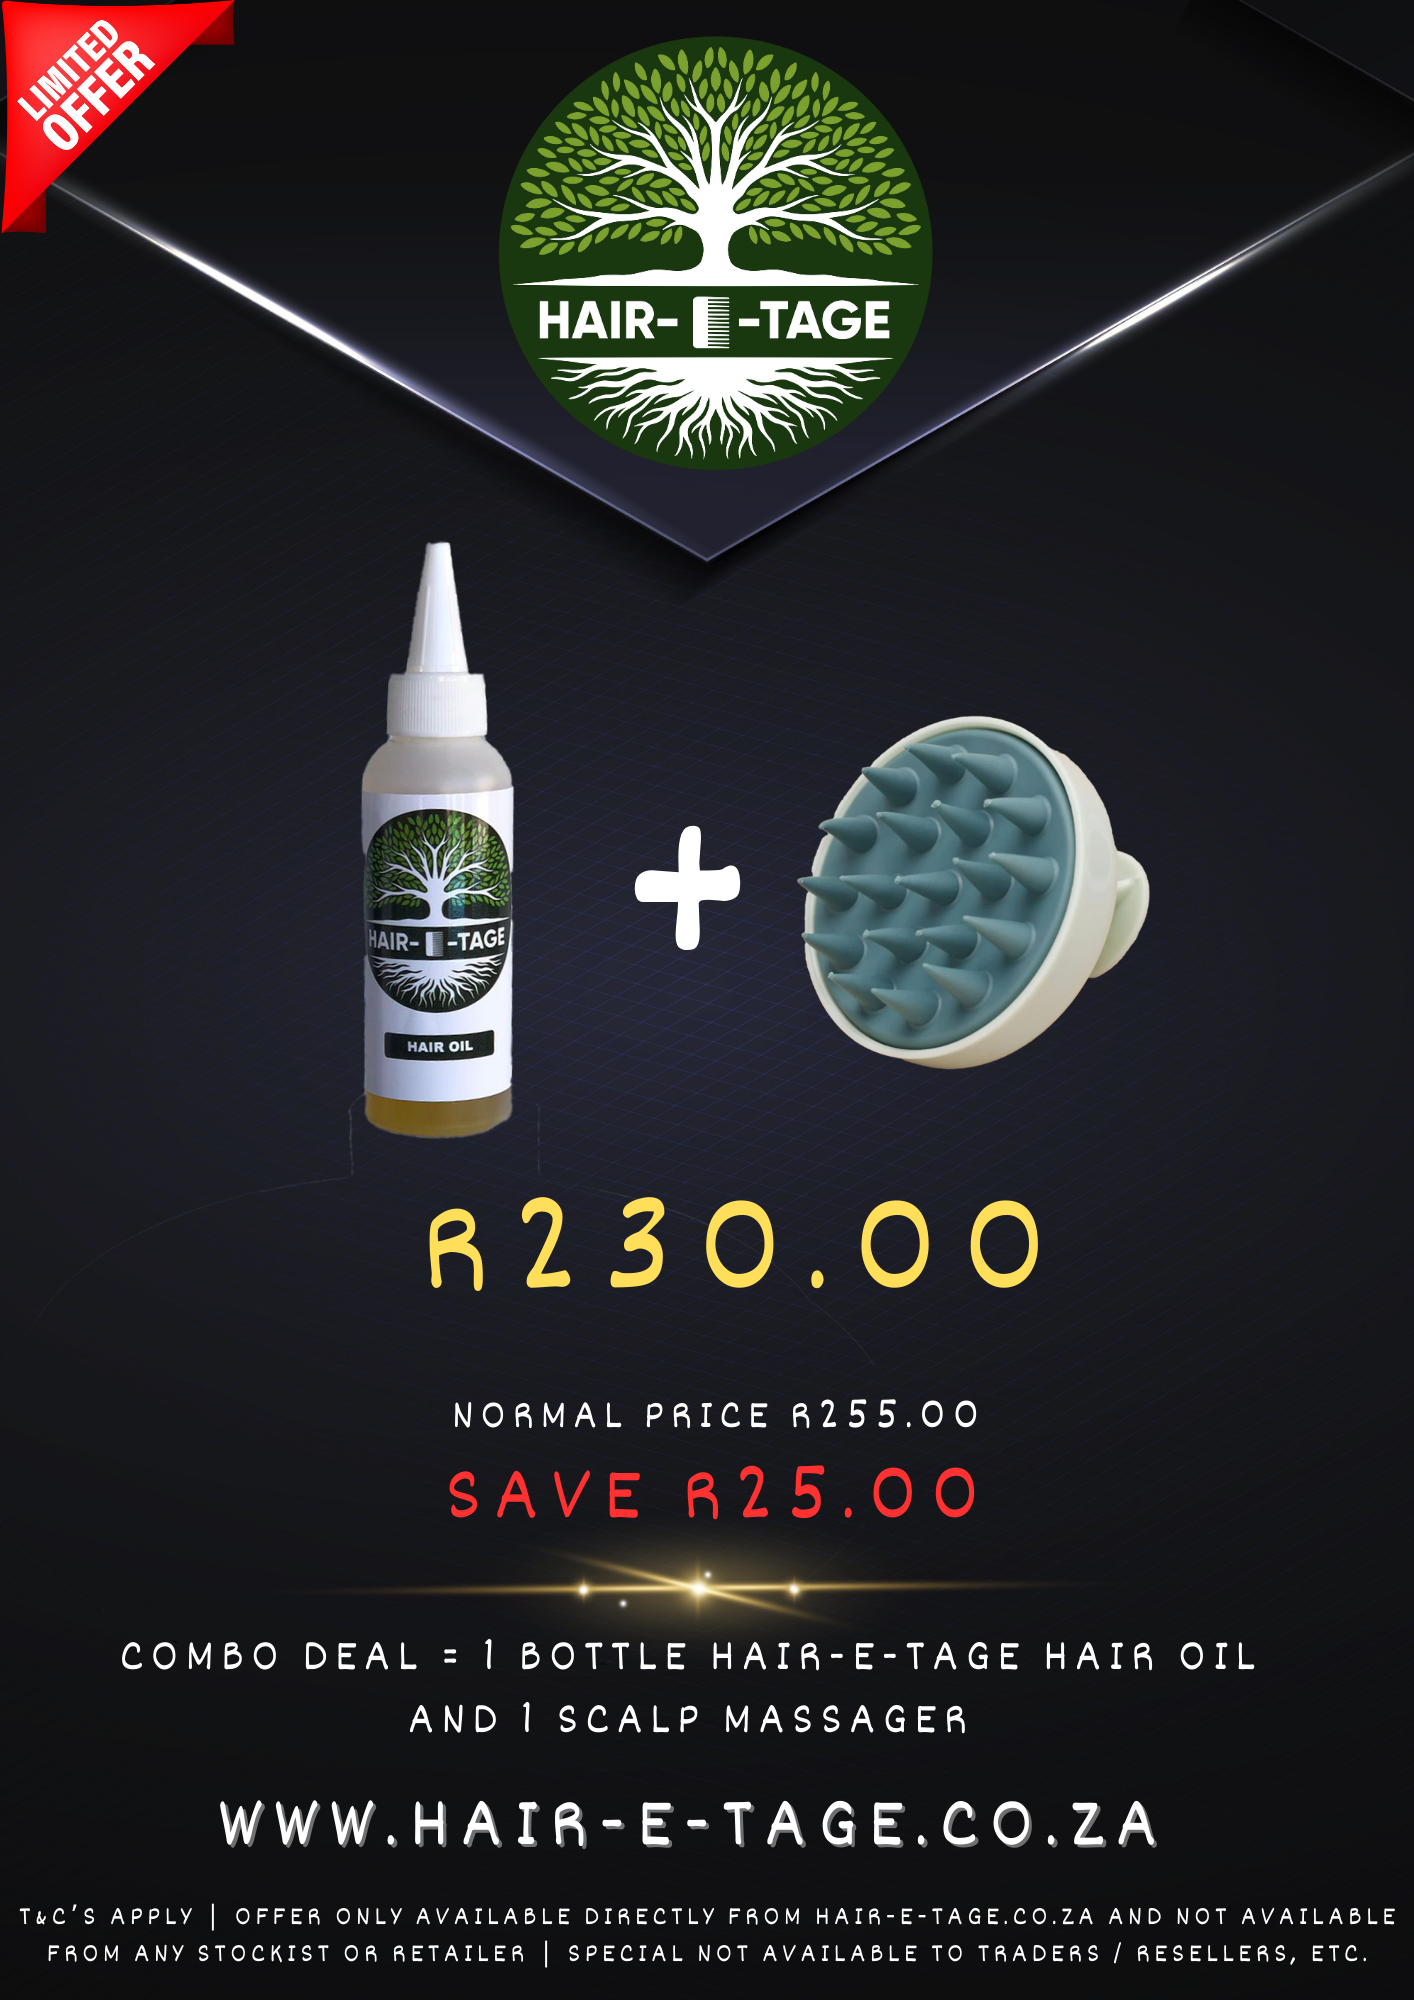 Limited Offer - 1x Bottle Hair-E-Tage Hair Oil + 1x Scalp Massager